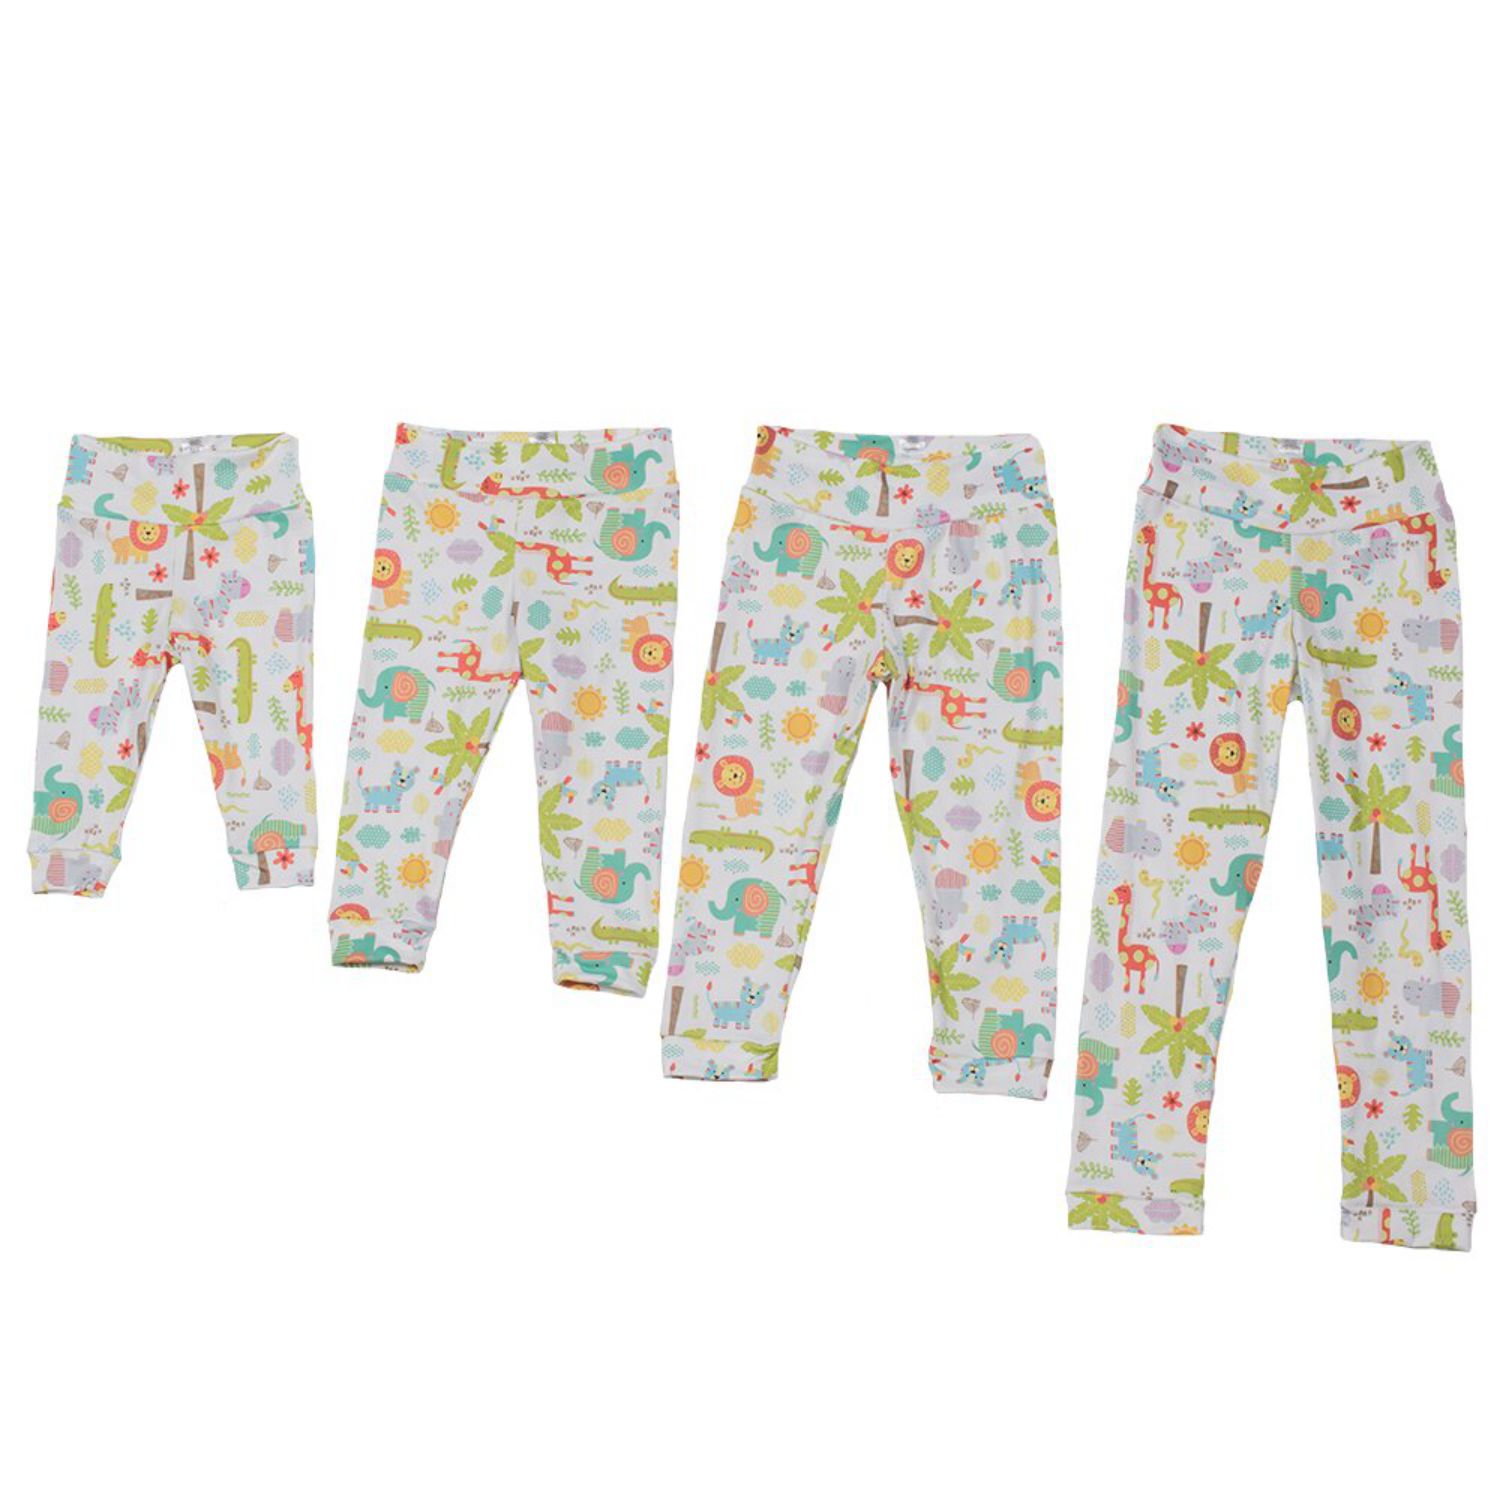 Bumblito Leggings Pattern: Wild About you / Size: S (50 - 68)